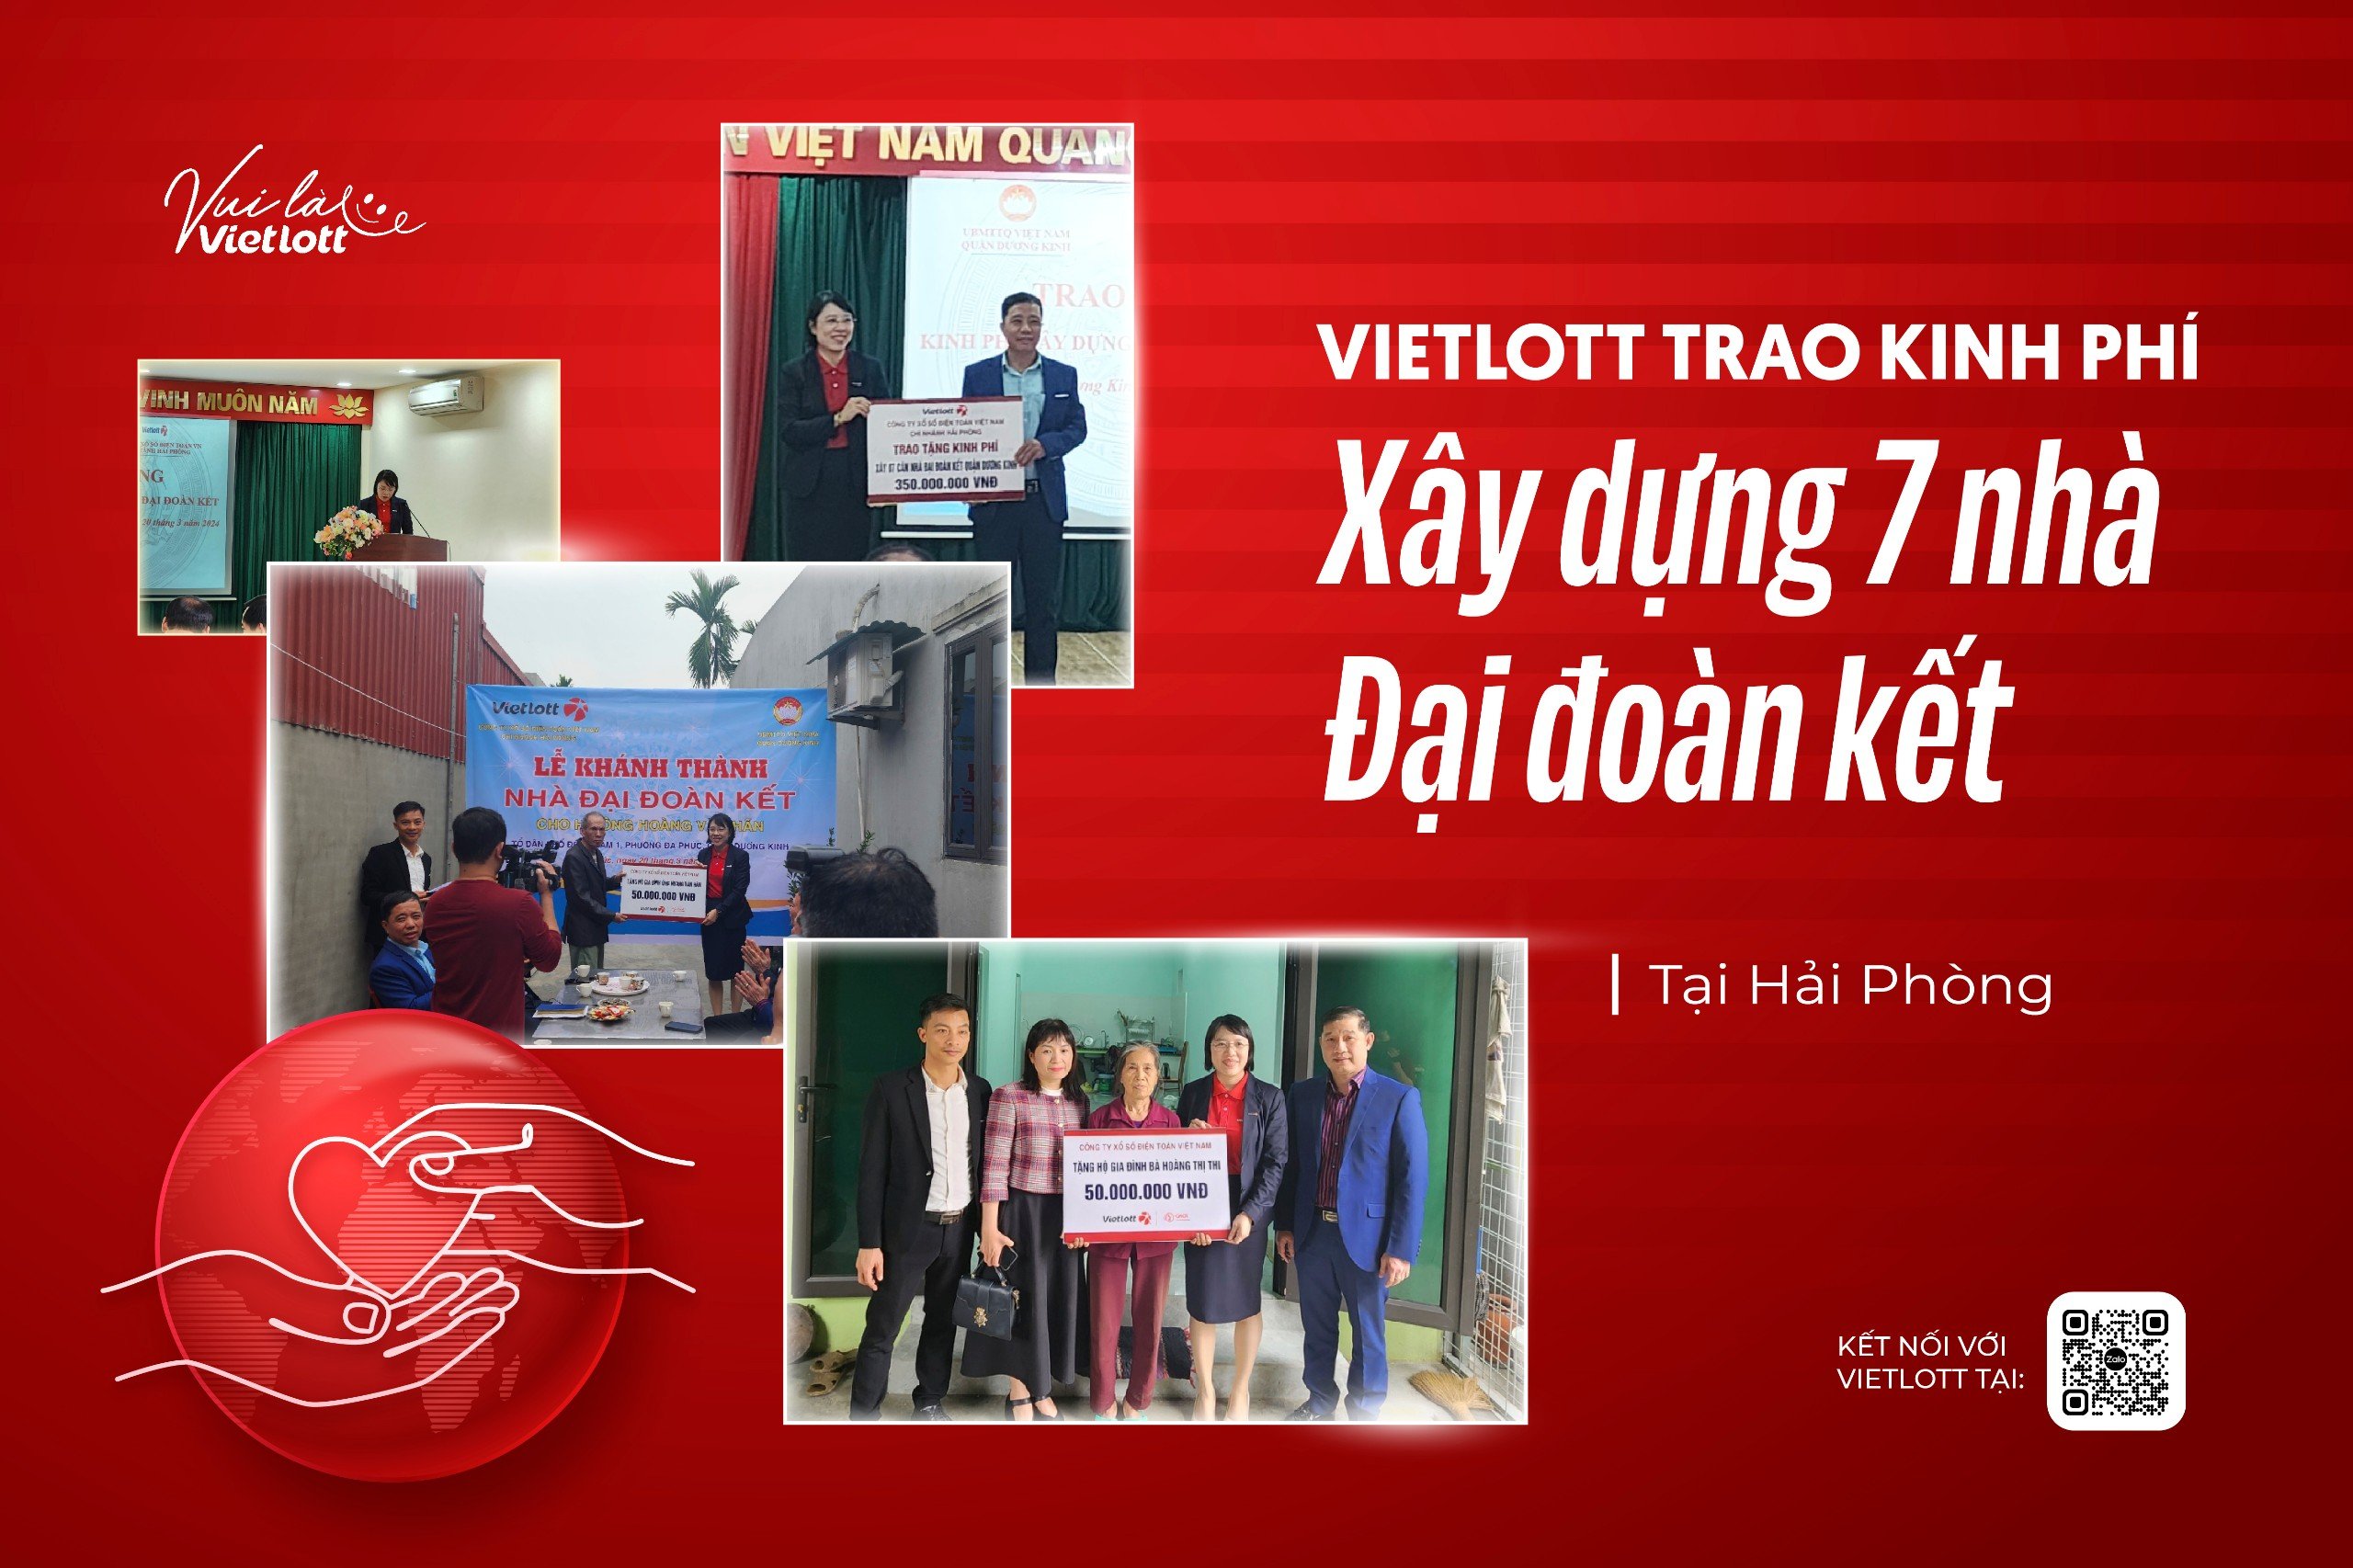 VIETLOTT HANDS OVER 7 SOLIDARITY HOUSES TO DIFFICULT HOUSEHOLDS IN HAI PHONG